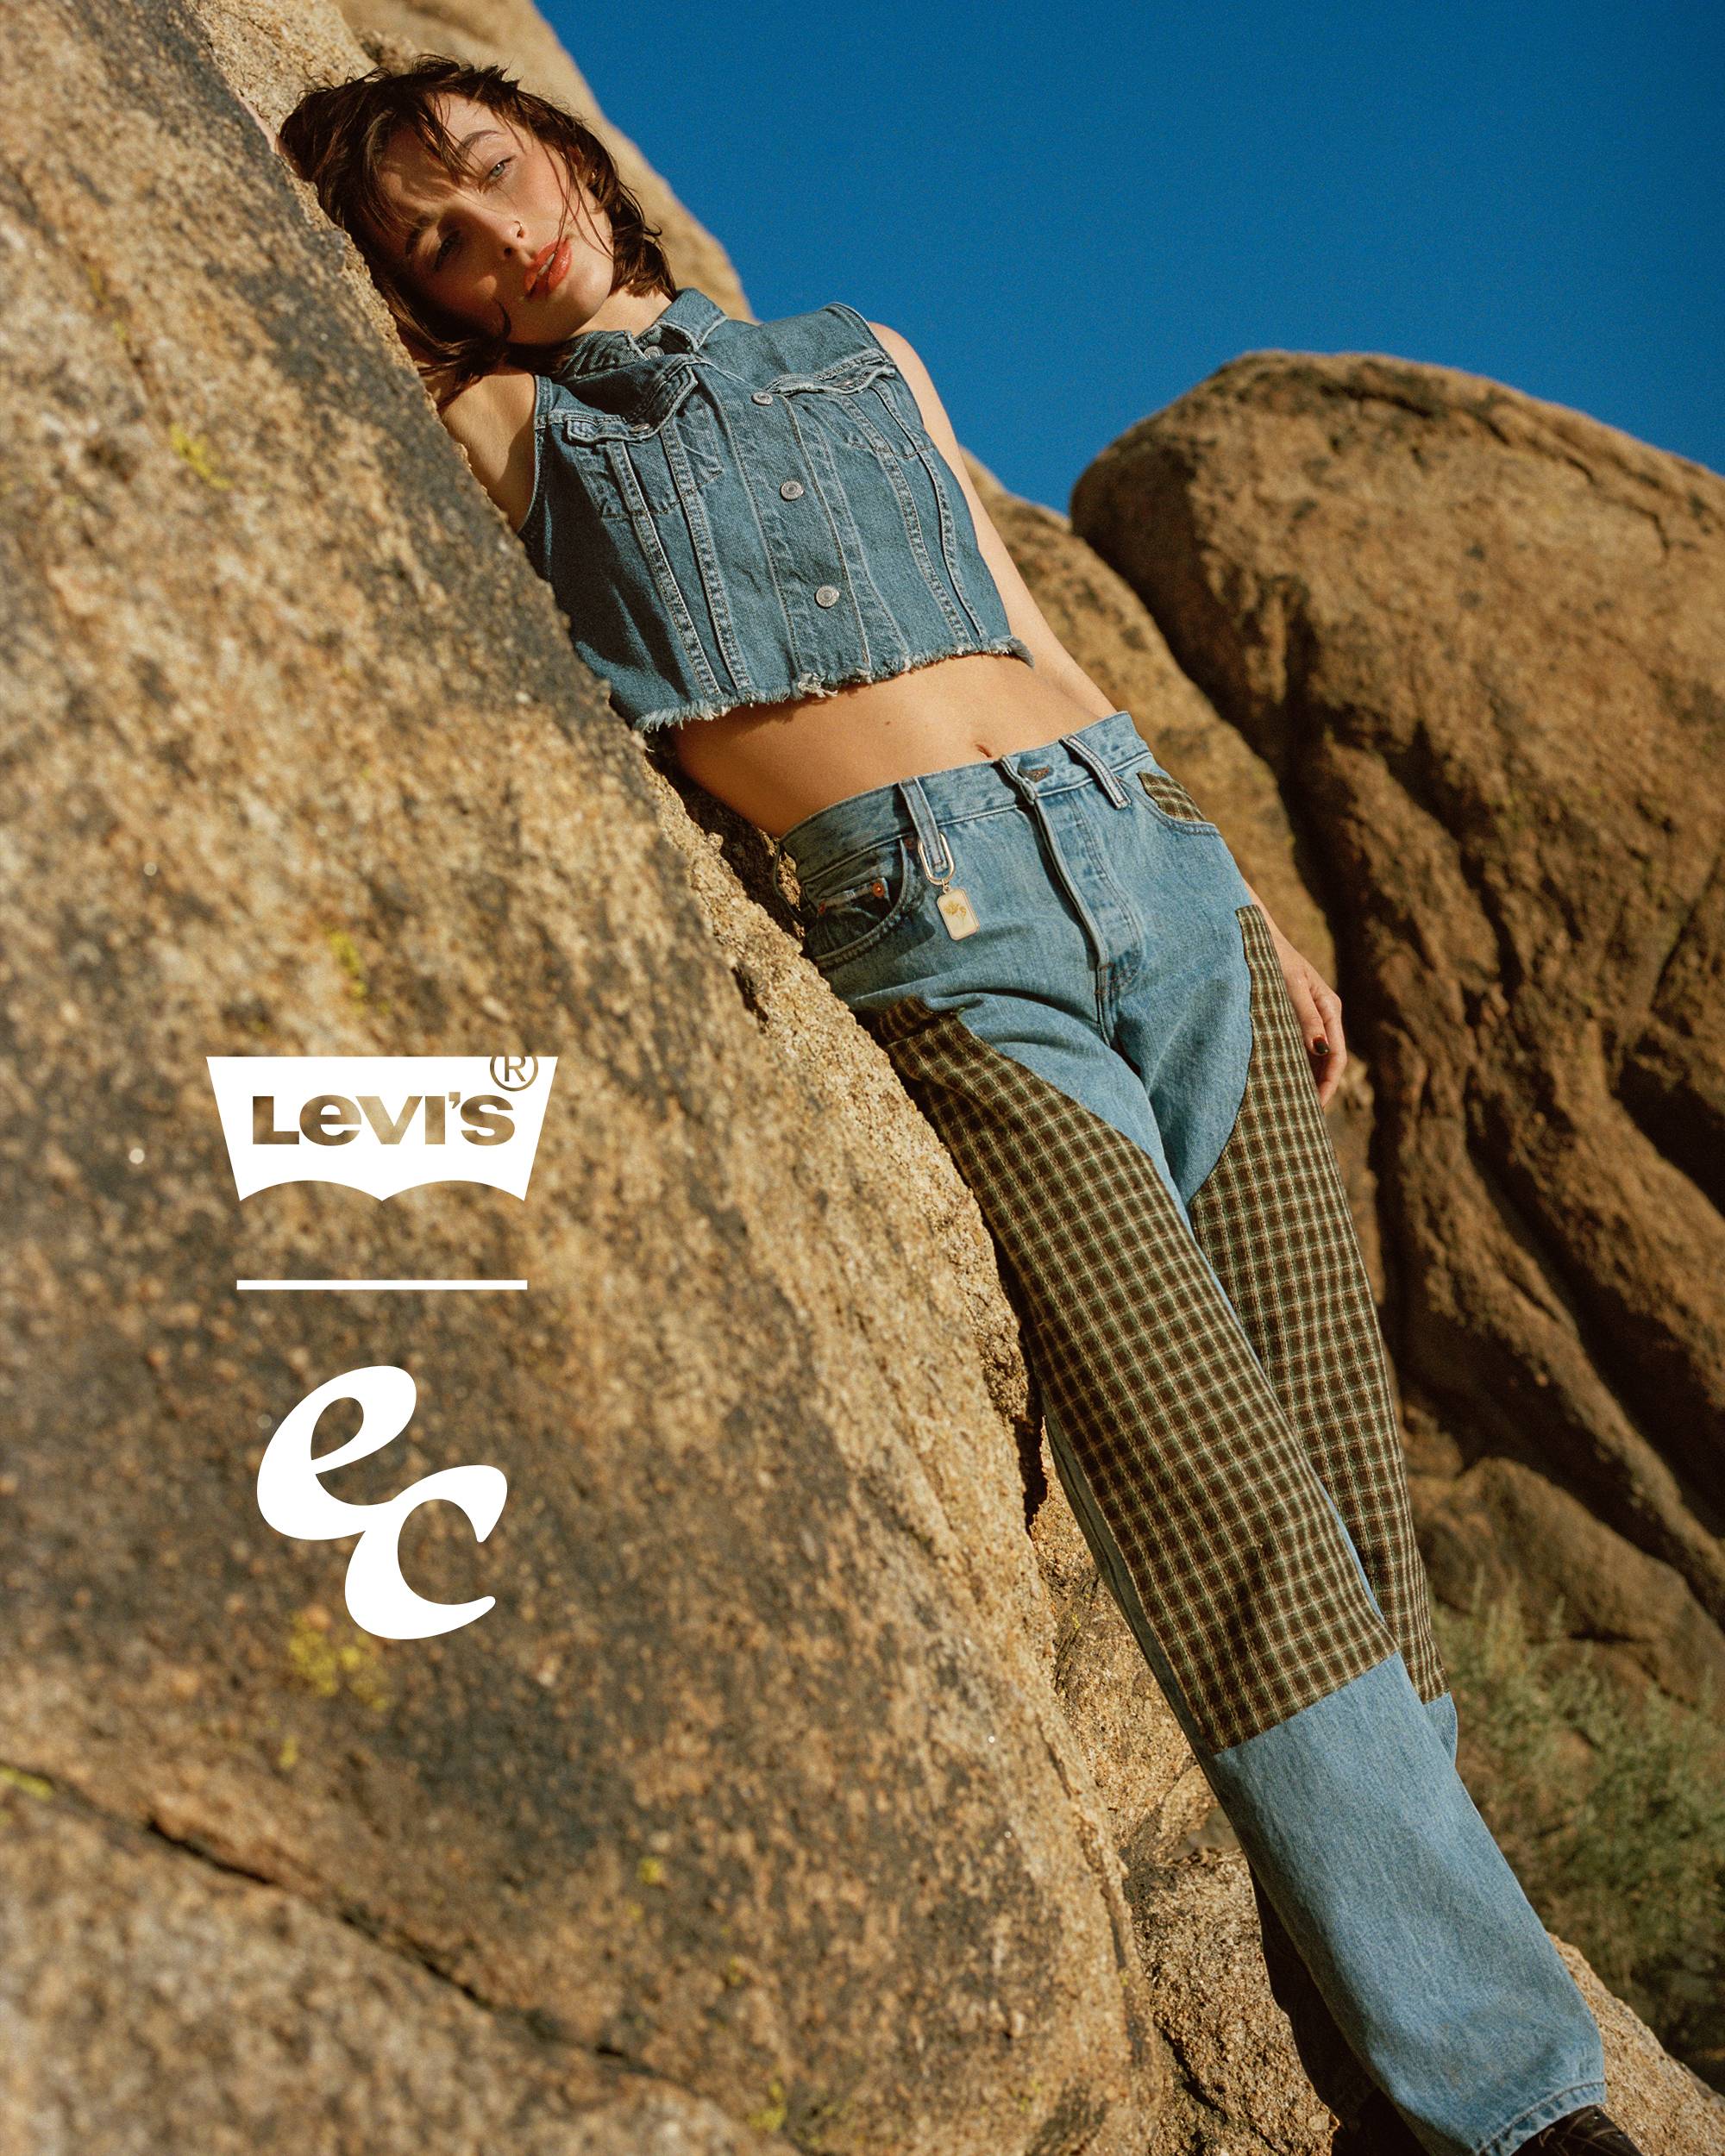 Levi's Sale - Up to 75% Off Styles | US